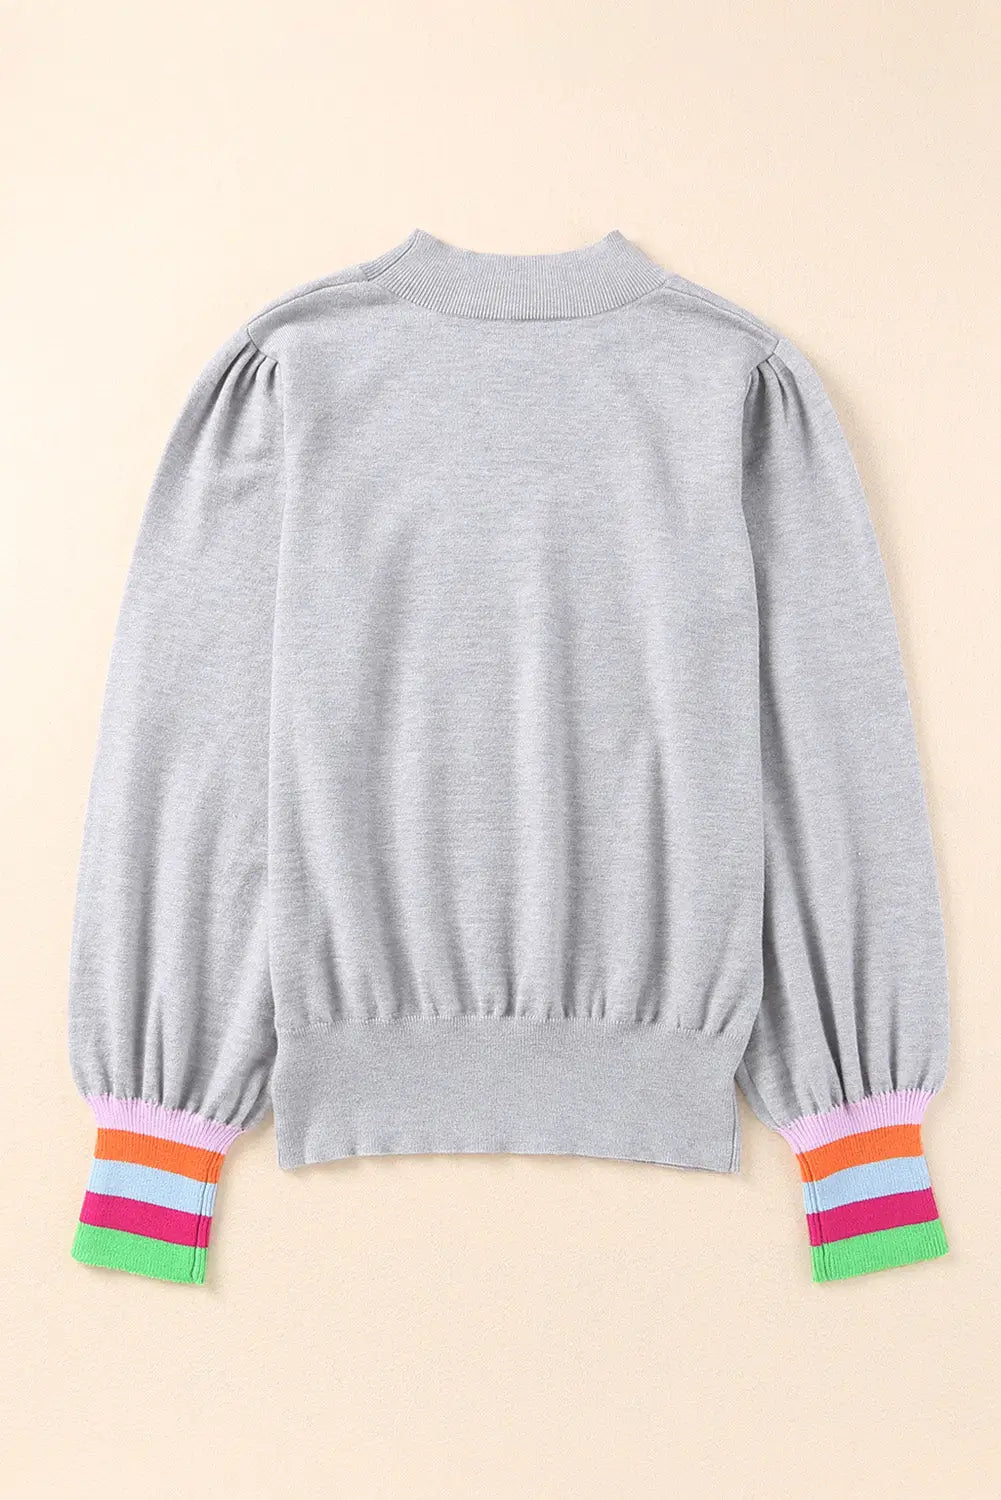 Gray crew neck colorful striped cuffs puff sleeves sweater - sweaters & cardigans